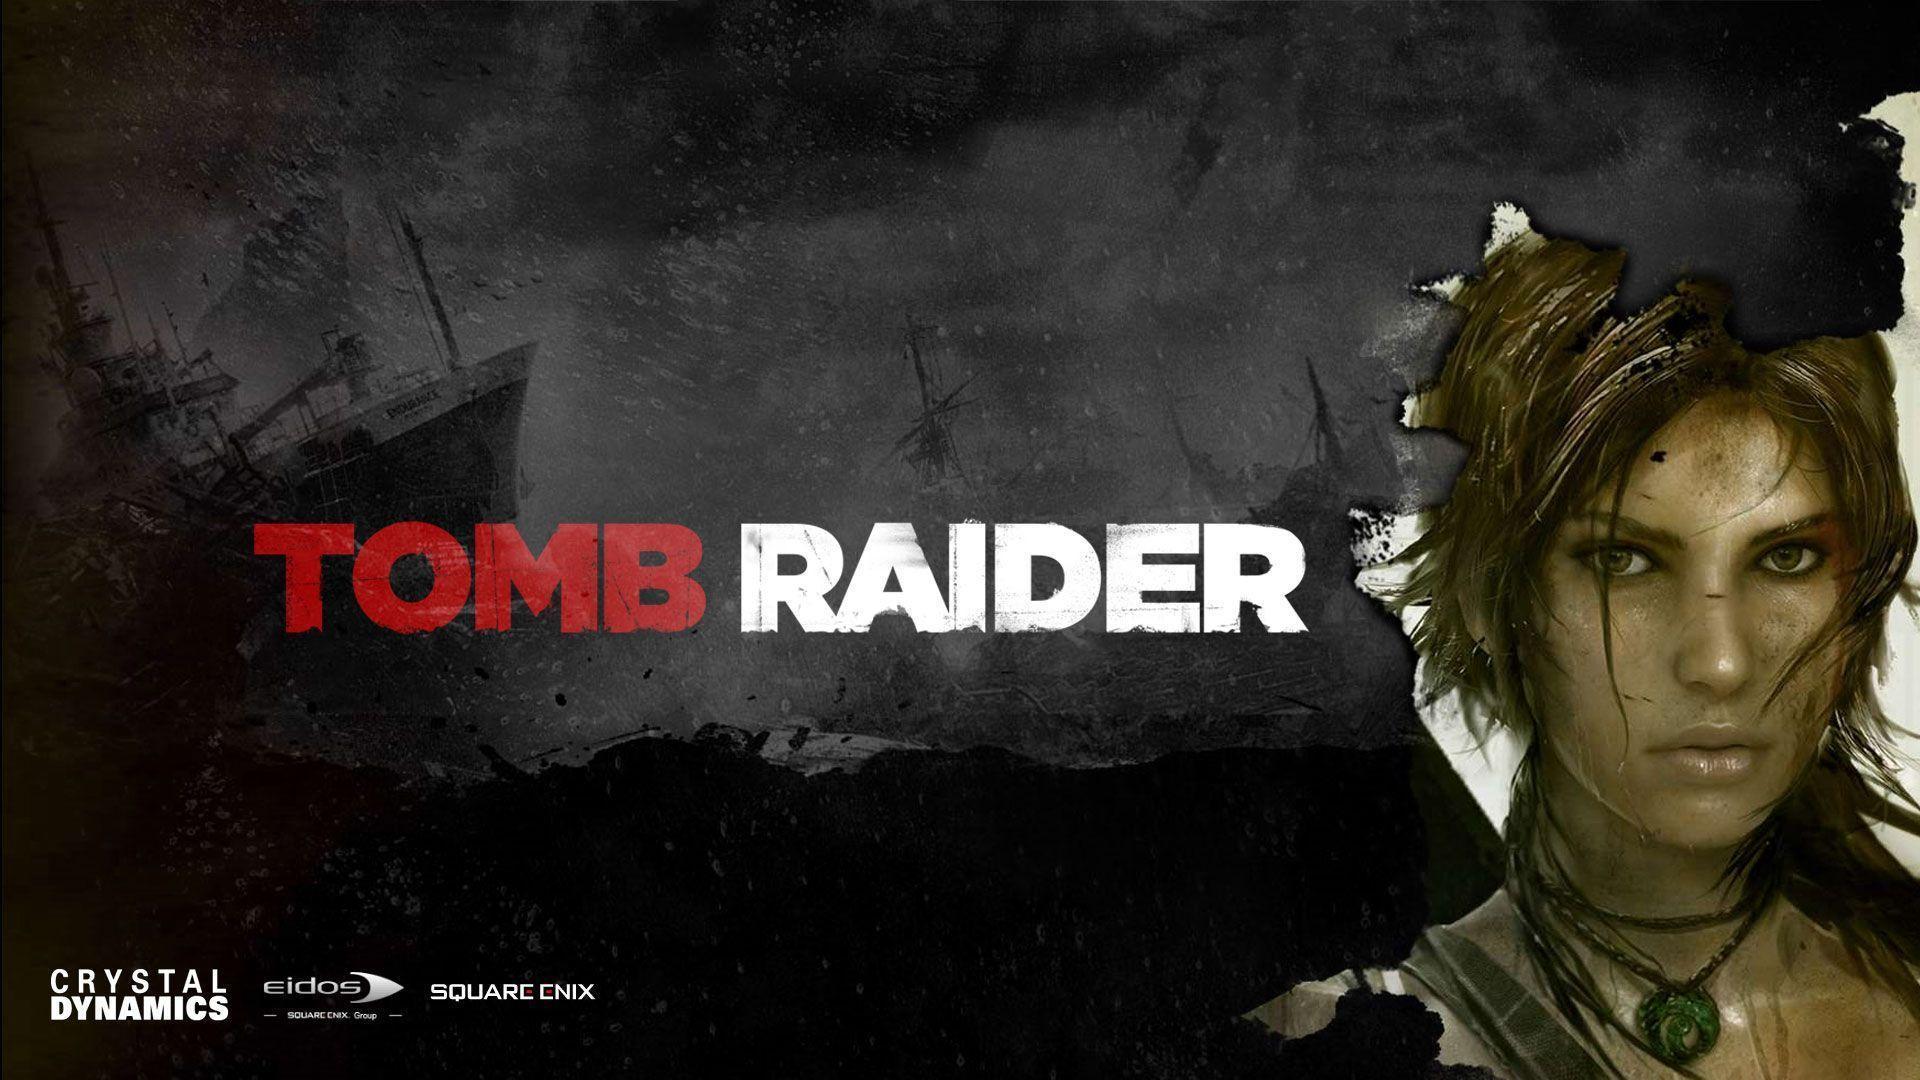 Tomb Raider Wallpaper Background 42142 HD Picture. Top